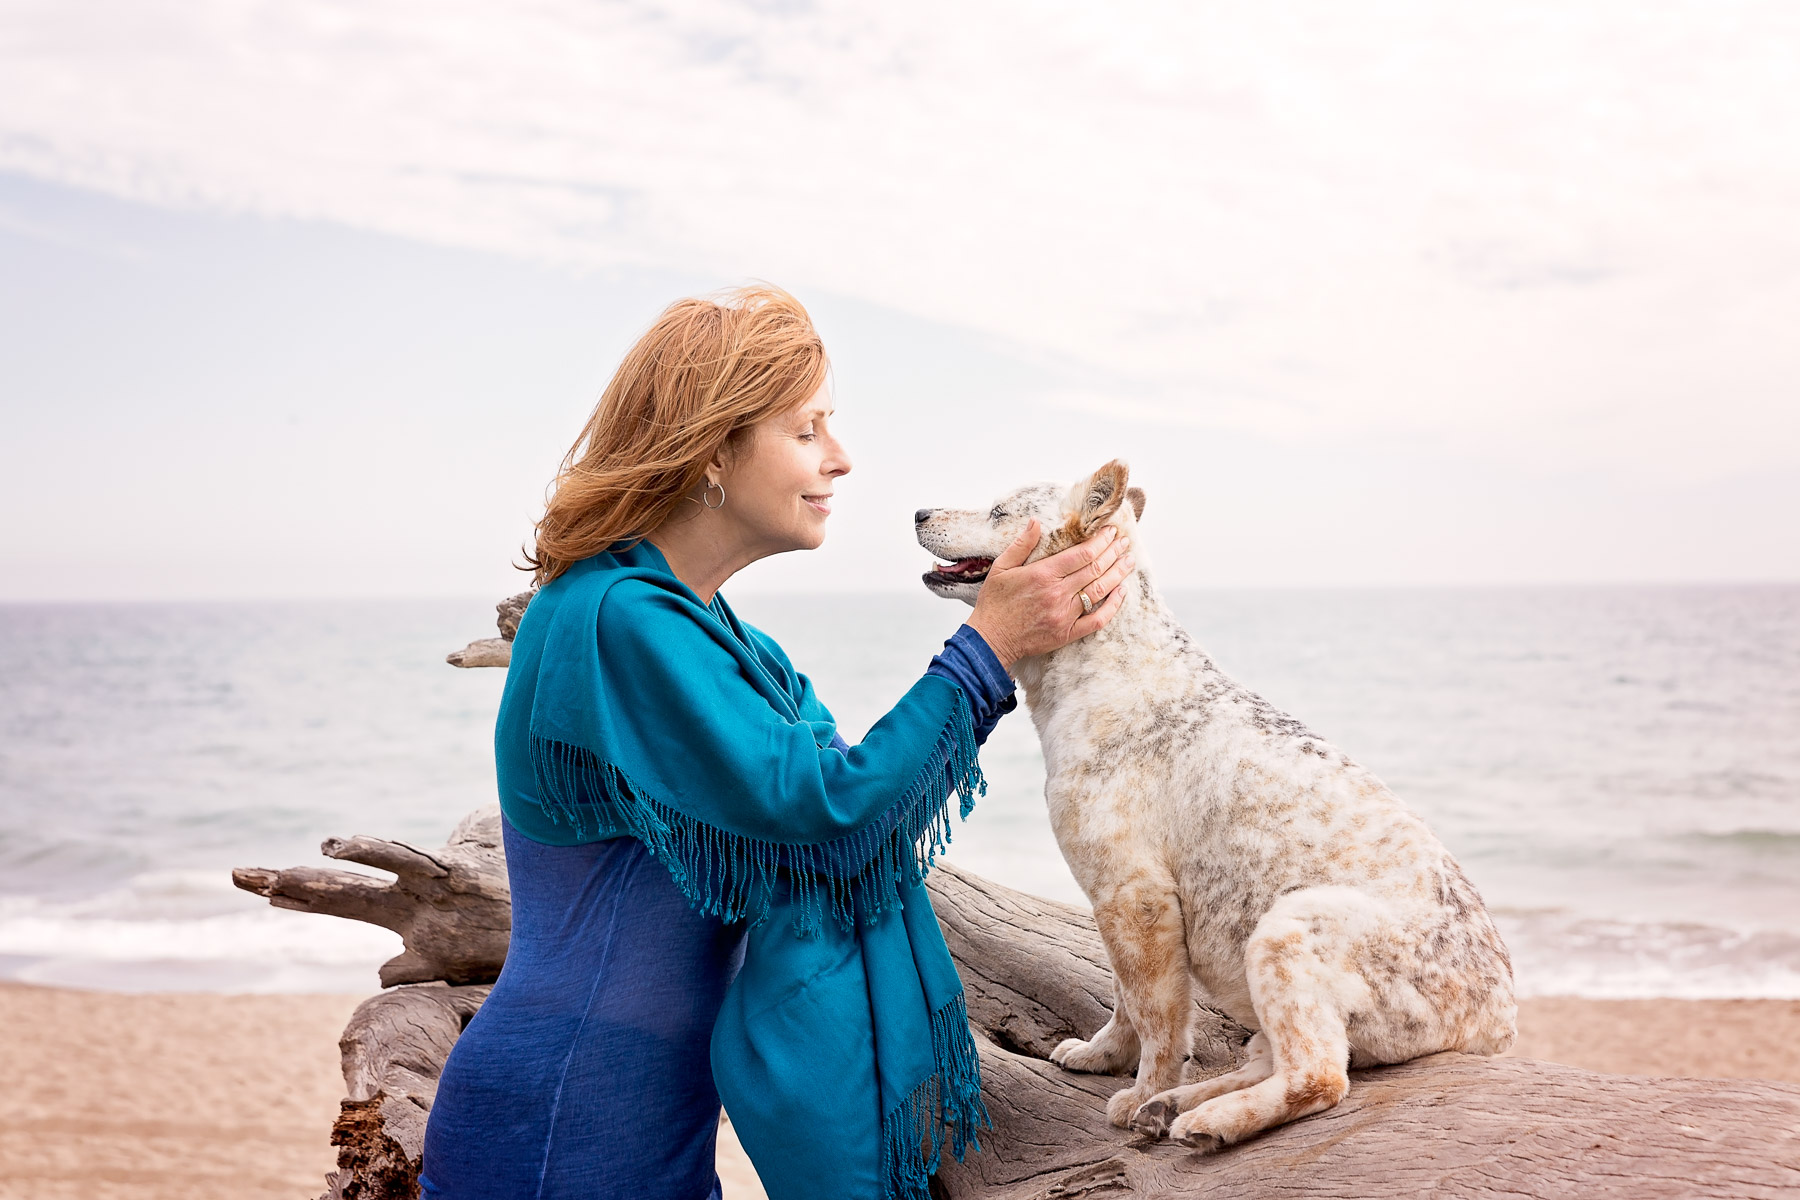 woman-with-dog-beach-ocean-photography-roxys-remedies-dog-shampoo-campaign-adweek-lifestyle-photographer.jpg